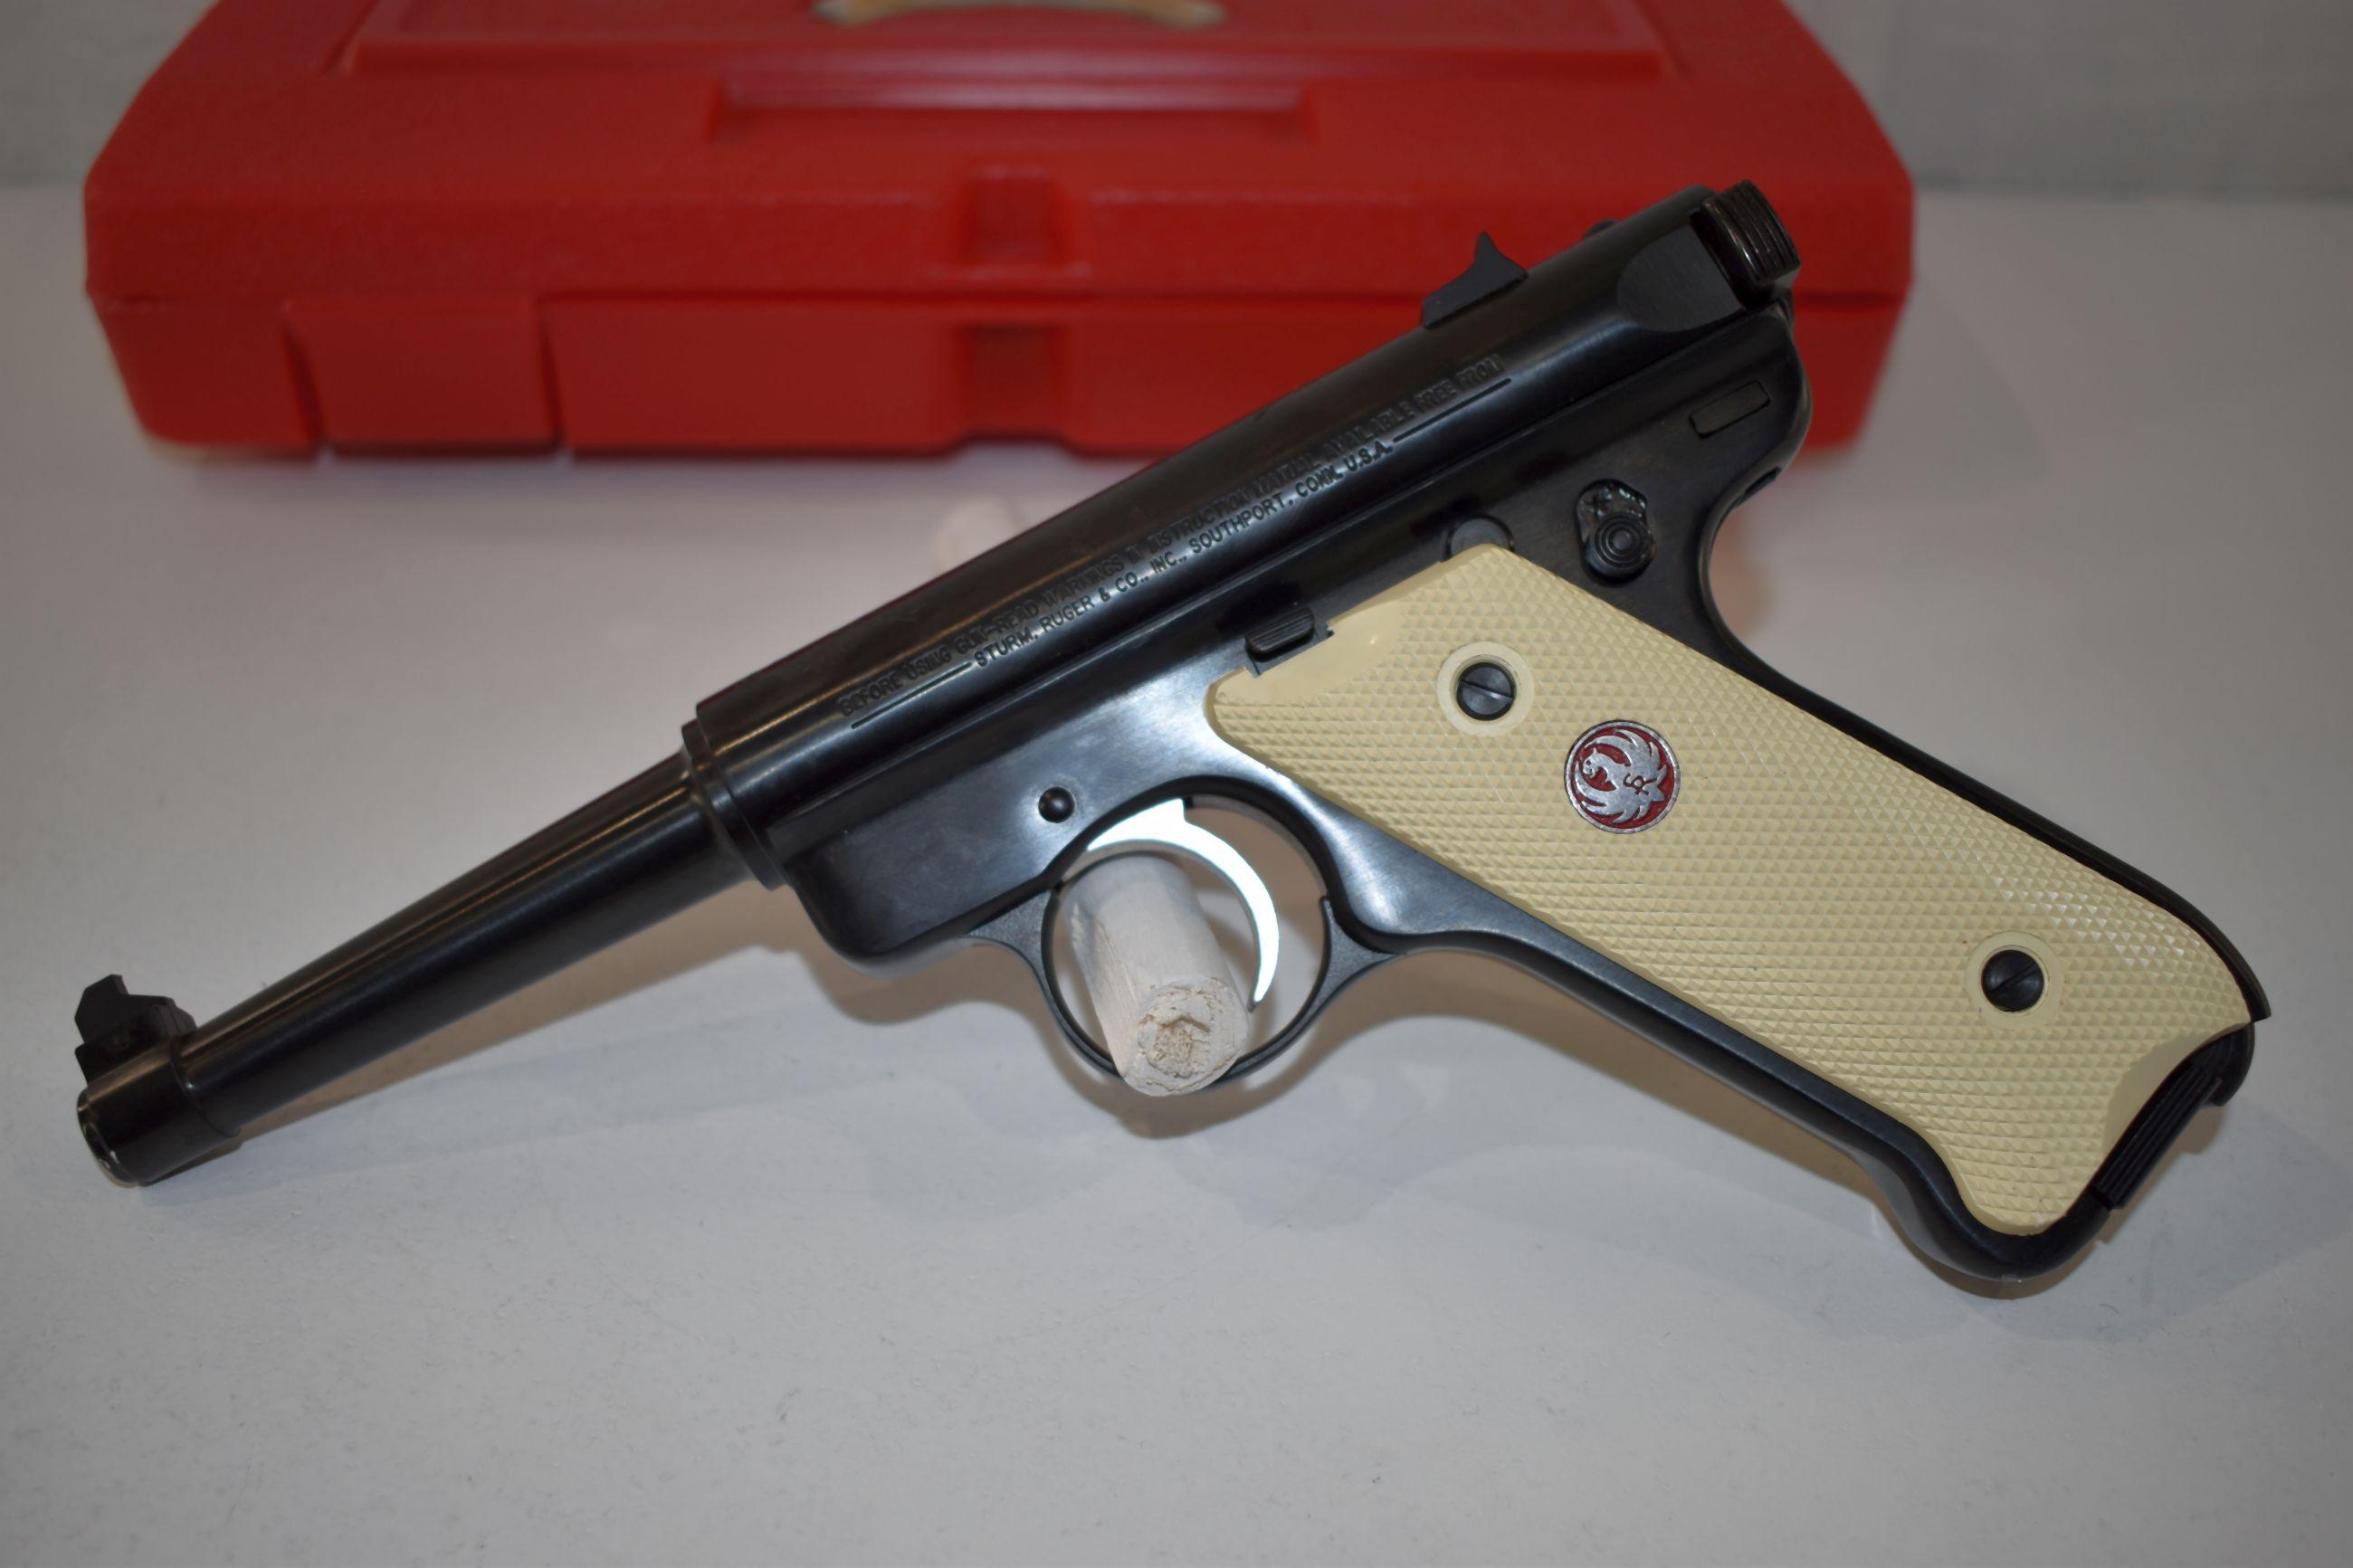 Ruger Mark II 22 cal LR Semi Auto Pistol, NRA William B. Ruger Endowment Commemorative, 1916 to 2002